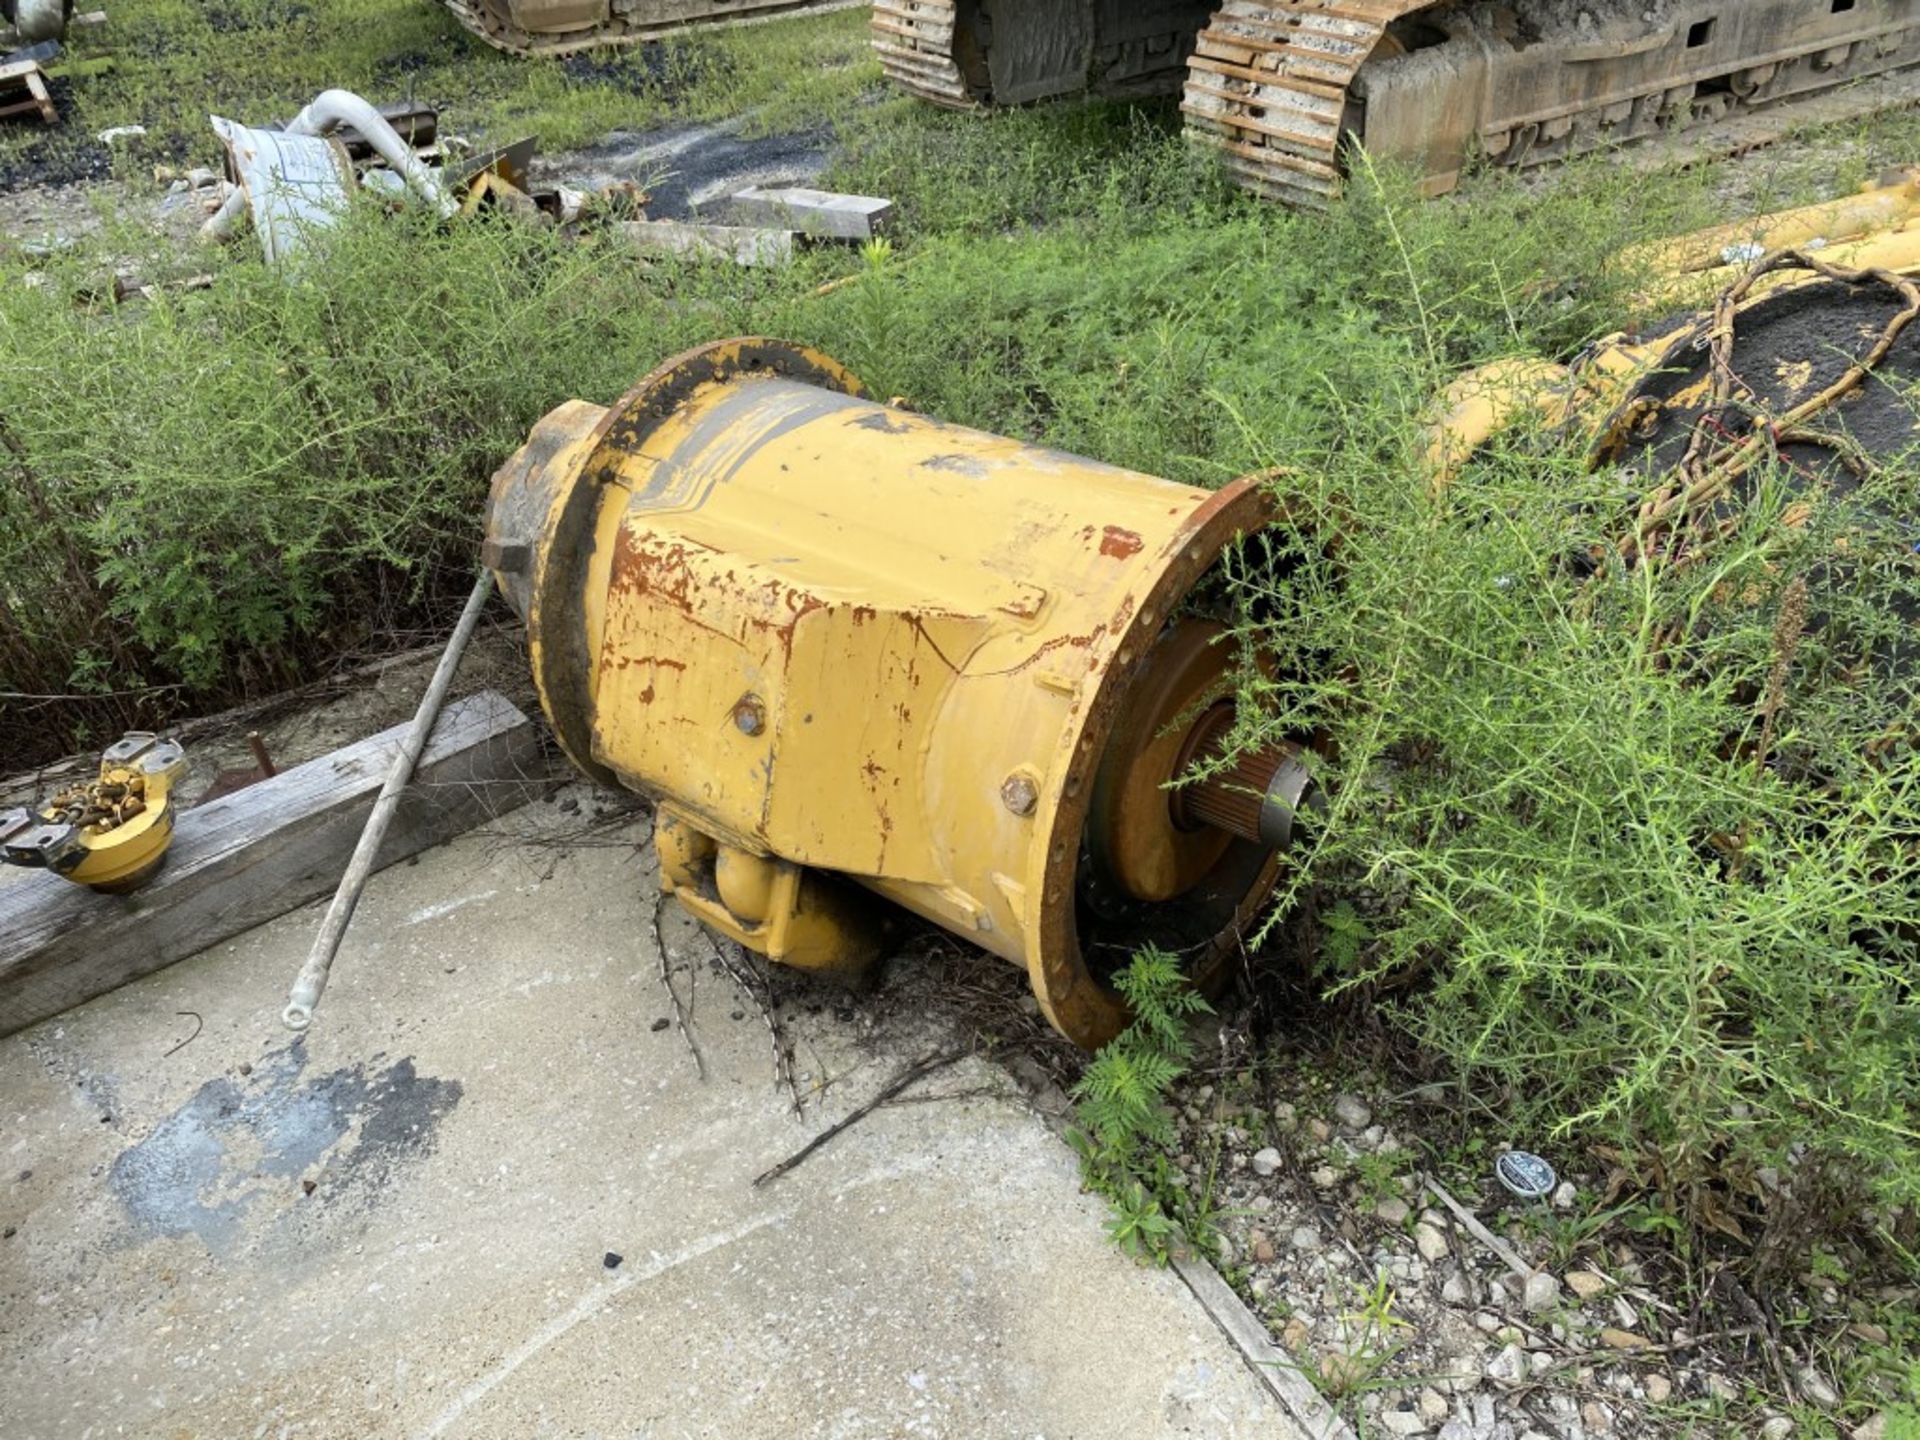 CATERPILLAR DOZER BLADE, 241.8'', S/N: 7GW00986, COMES WITH ASSORTED USED EQUIPMENT PARTS - Image 10 of 19